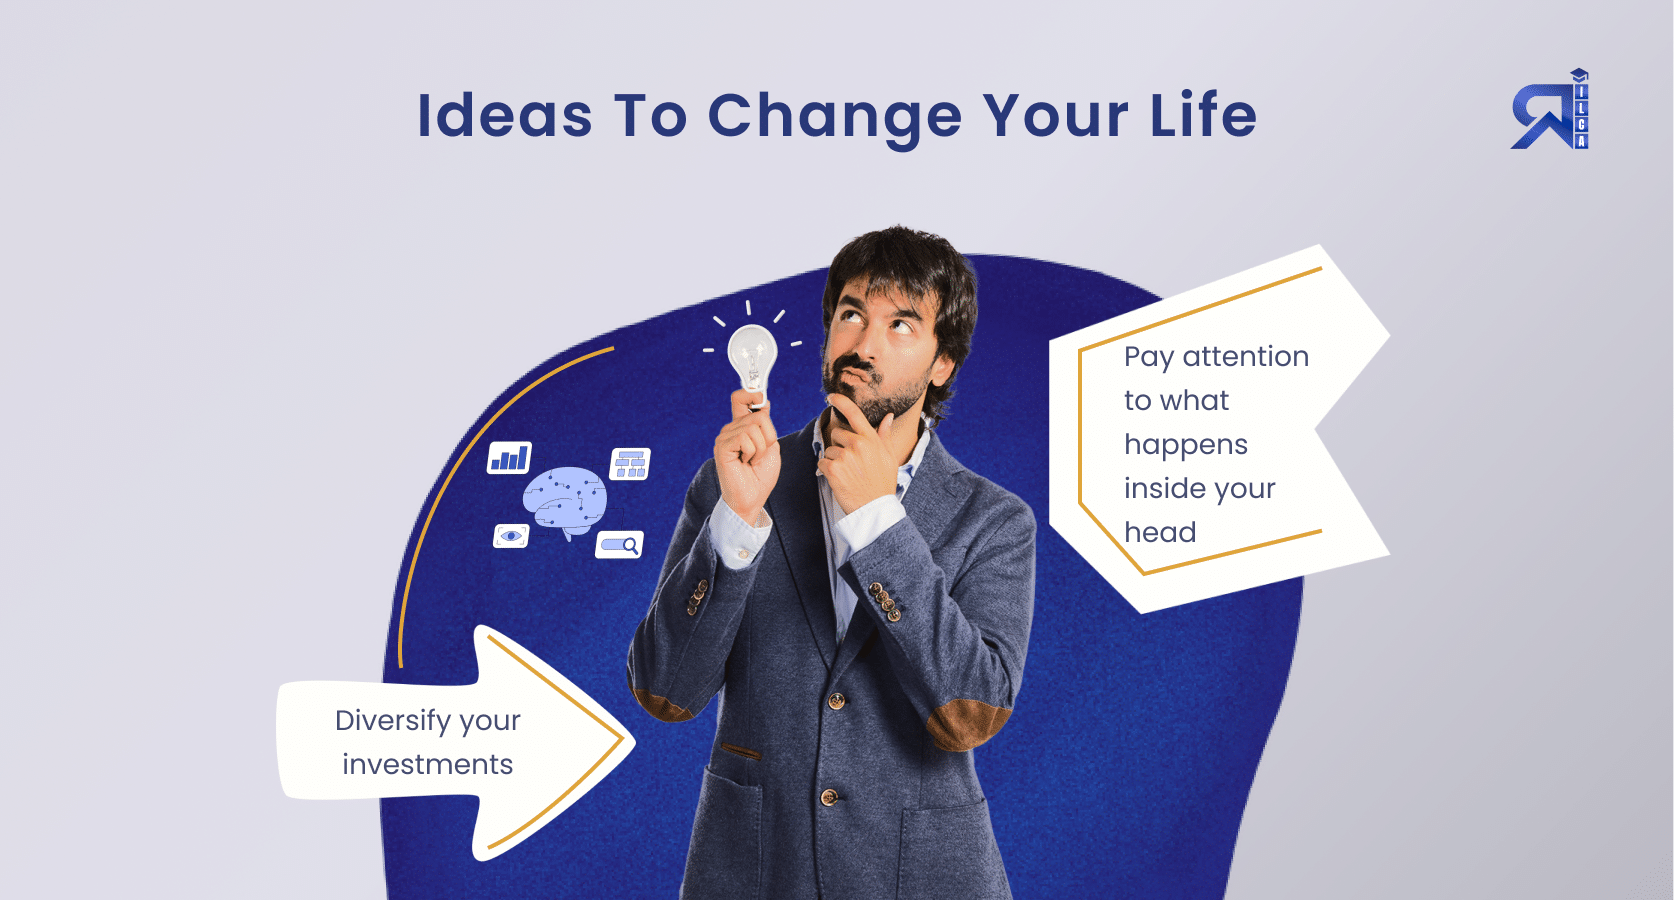 5 Bucket List Ideas to Change Your Life